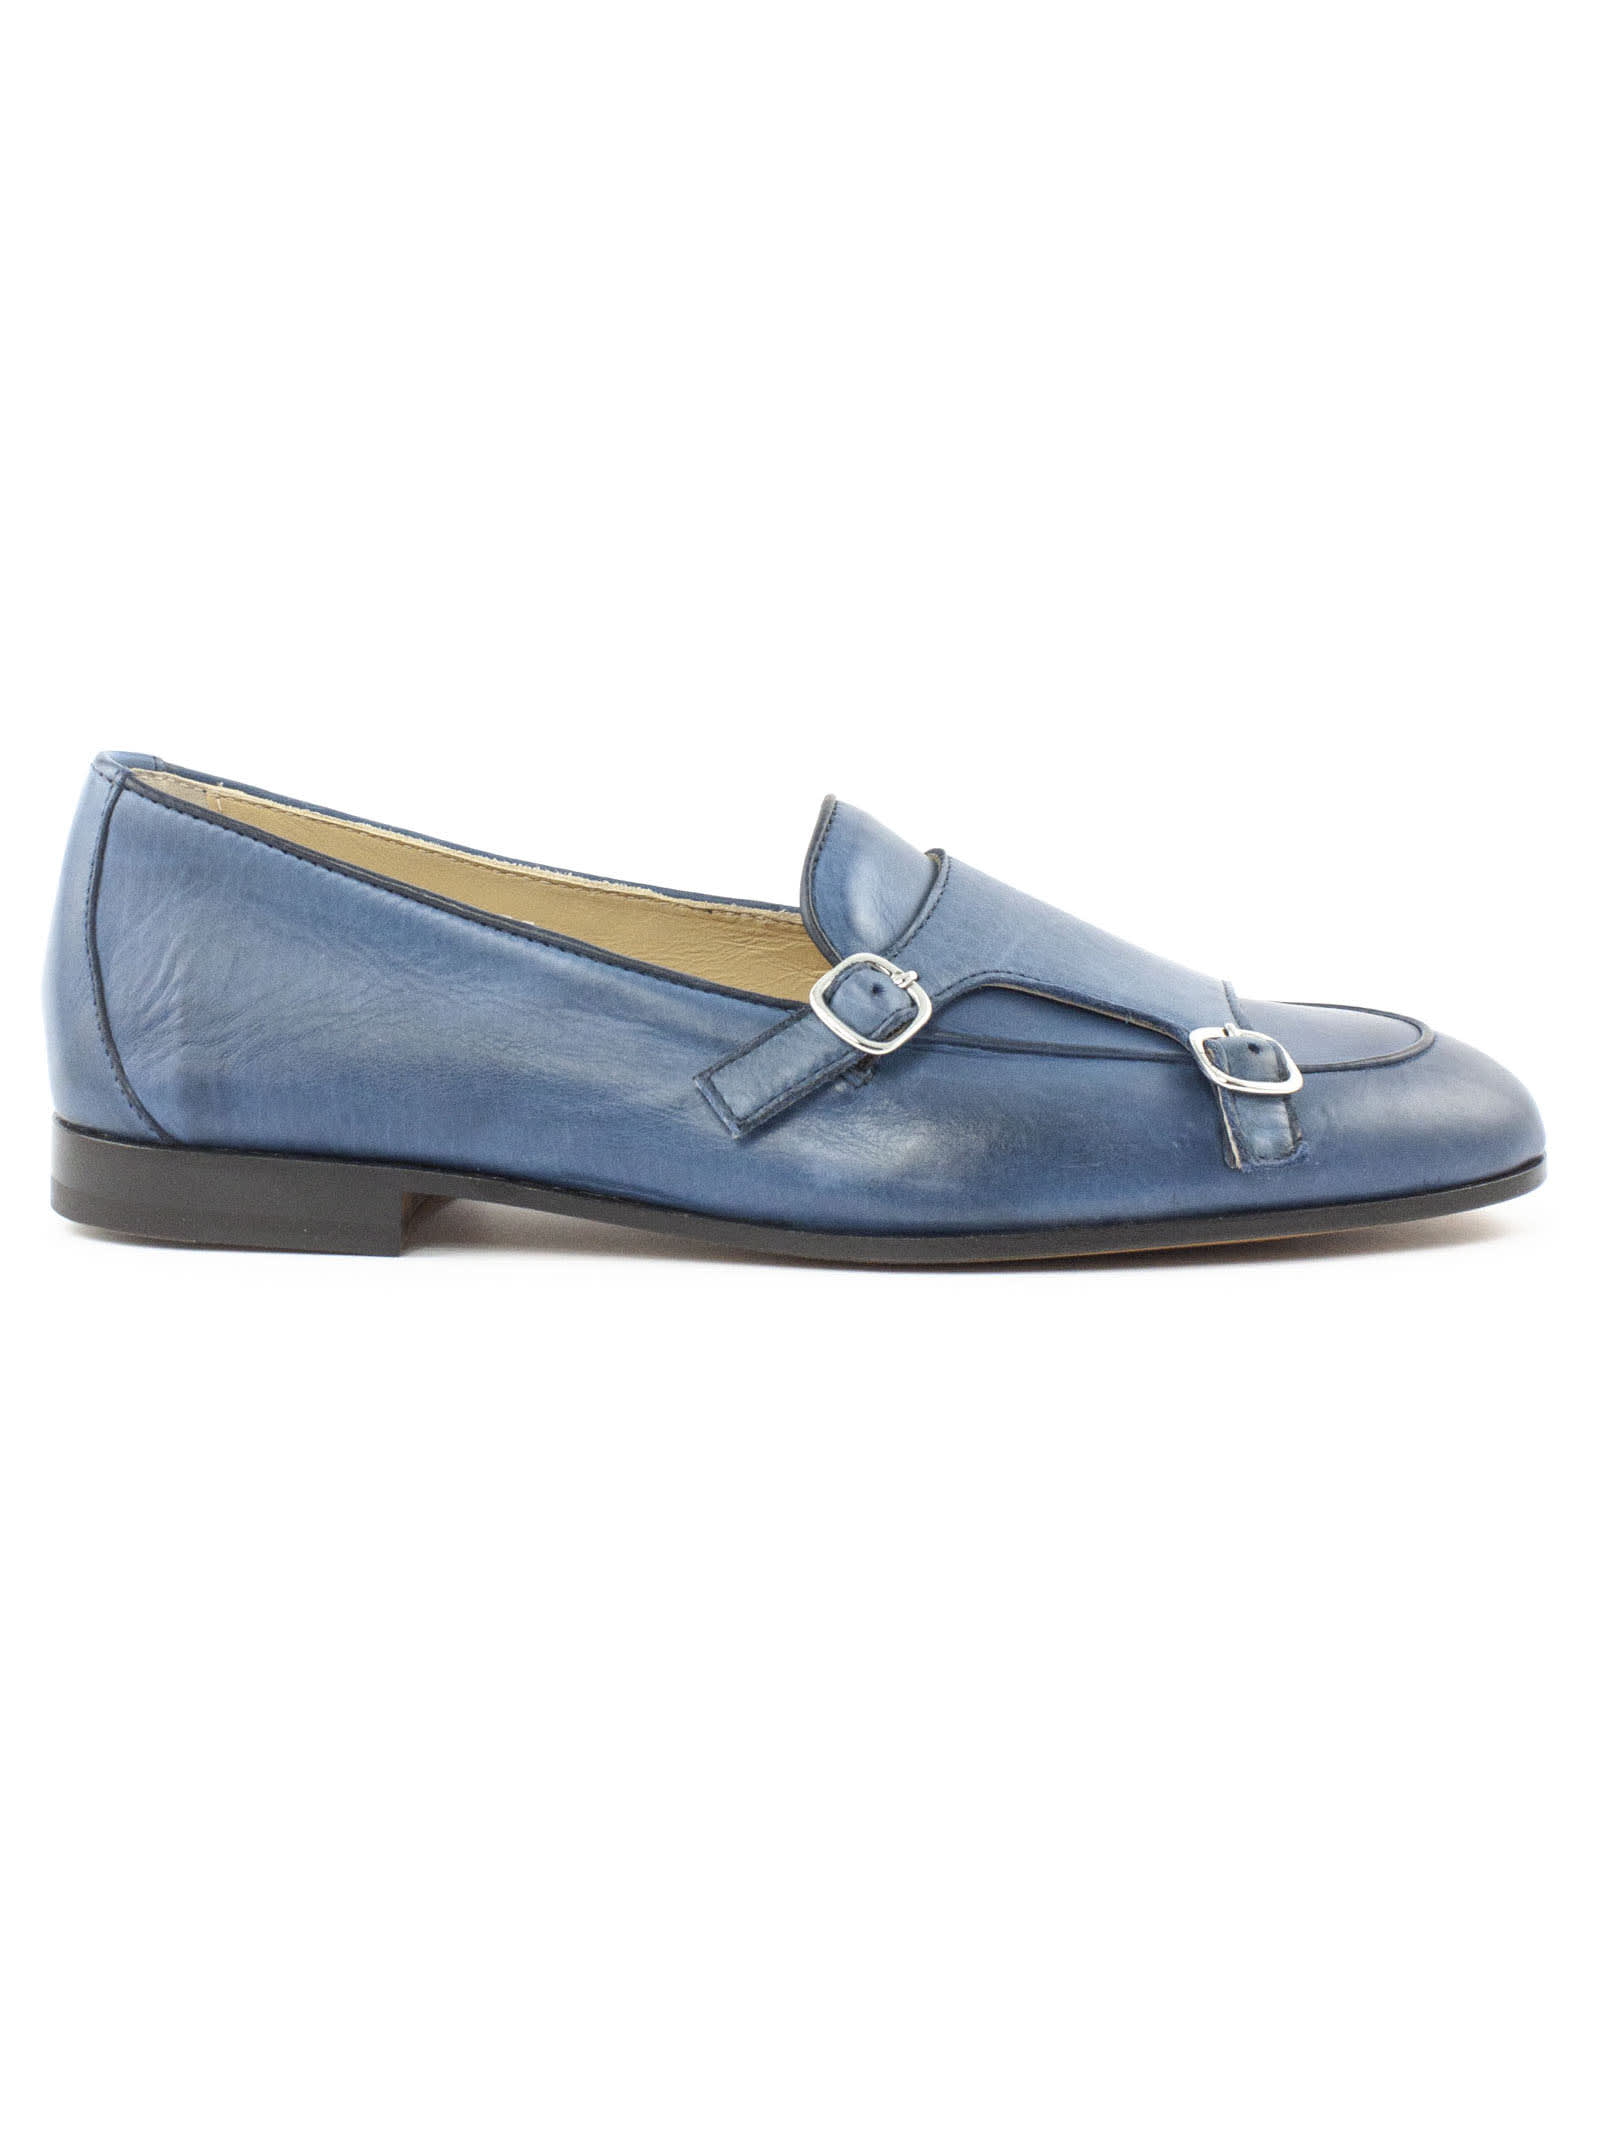 Doucals Light Blue Leather Loafer